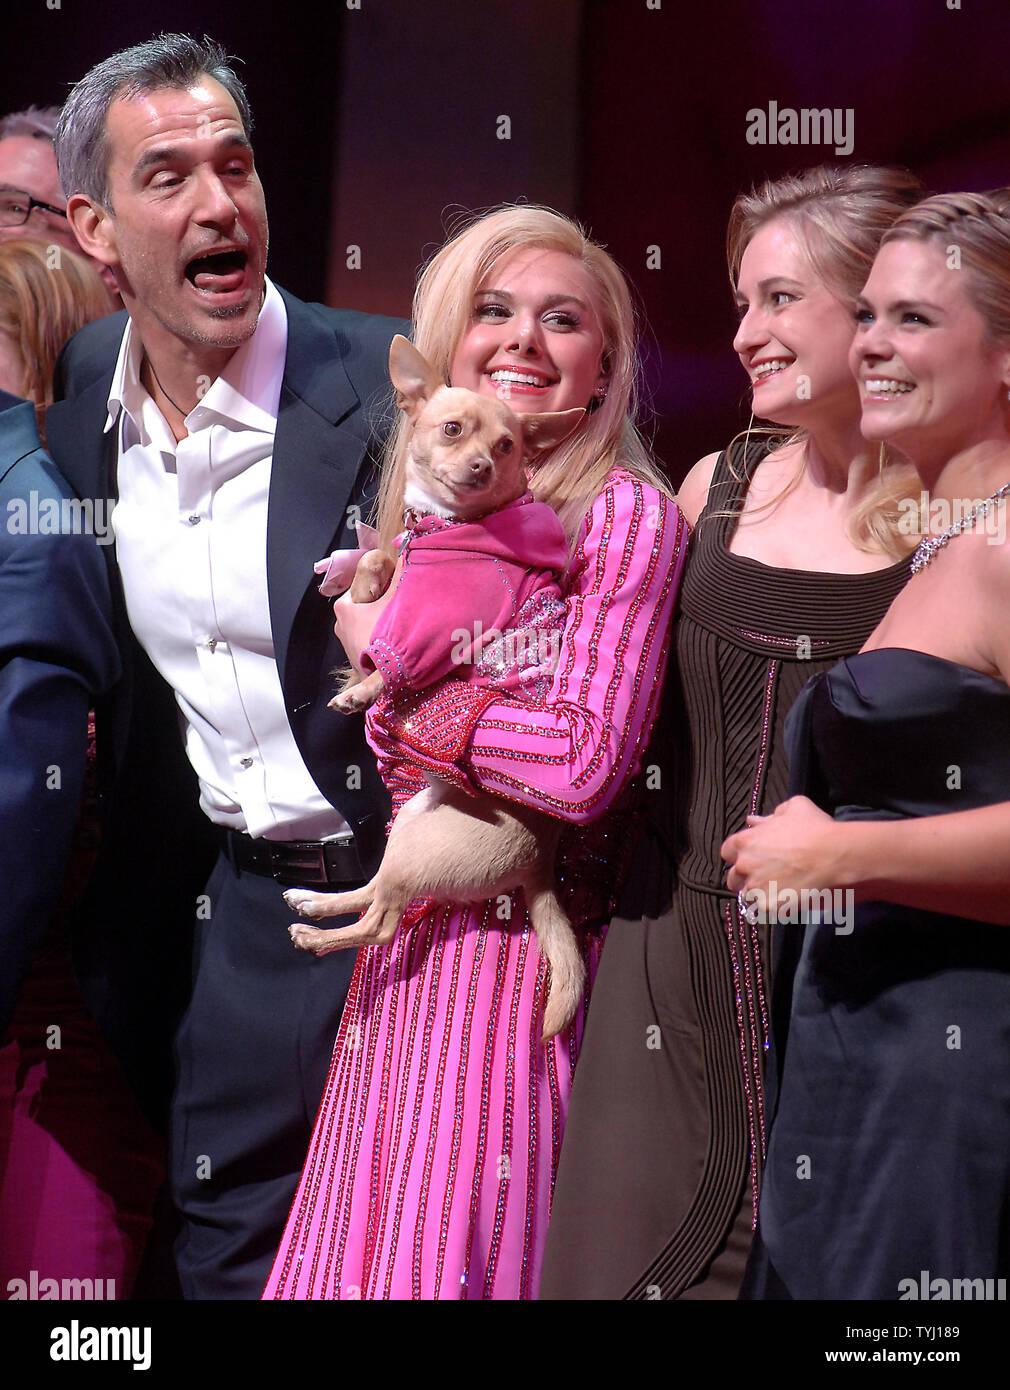 Director Jerry Mitchell and actress Laura Bell Bundy (left to right) plus cast take their opening night curtain call bows at New York's Palace theatre in the Broadway musical 'Legally Blonde' on April 29, 2007. The musical is based on the MGM film.  (UPI Photo/Ezio Petersen) Stock Photo